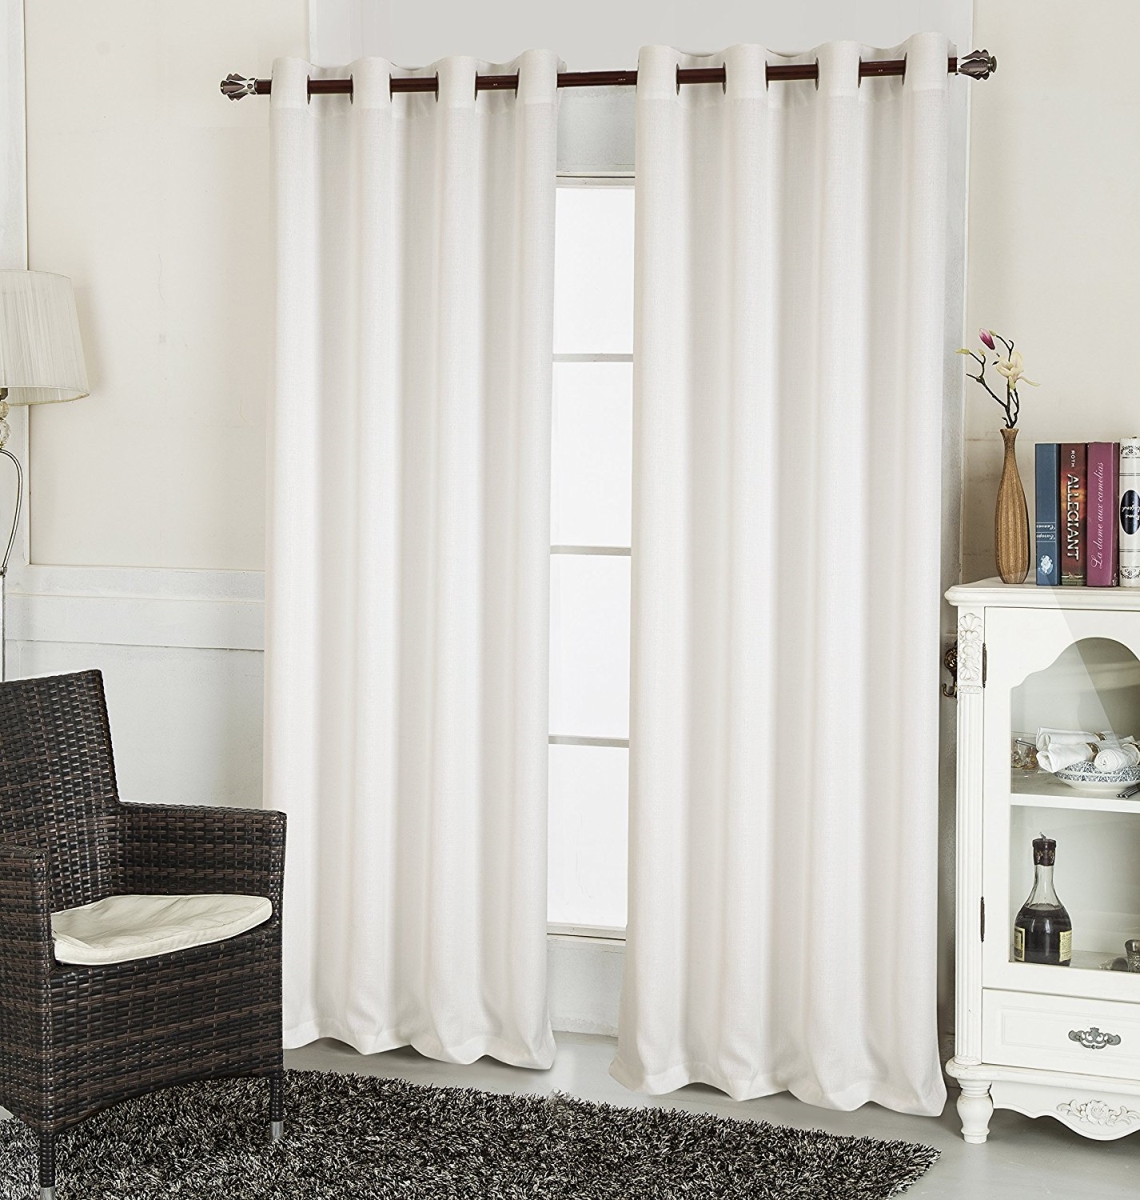 Pnl02197 Layne Textured 54 X 90 In. Grommet Curtain Panel, White